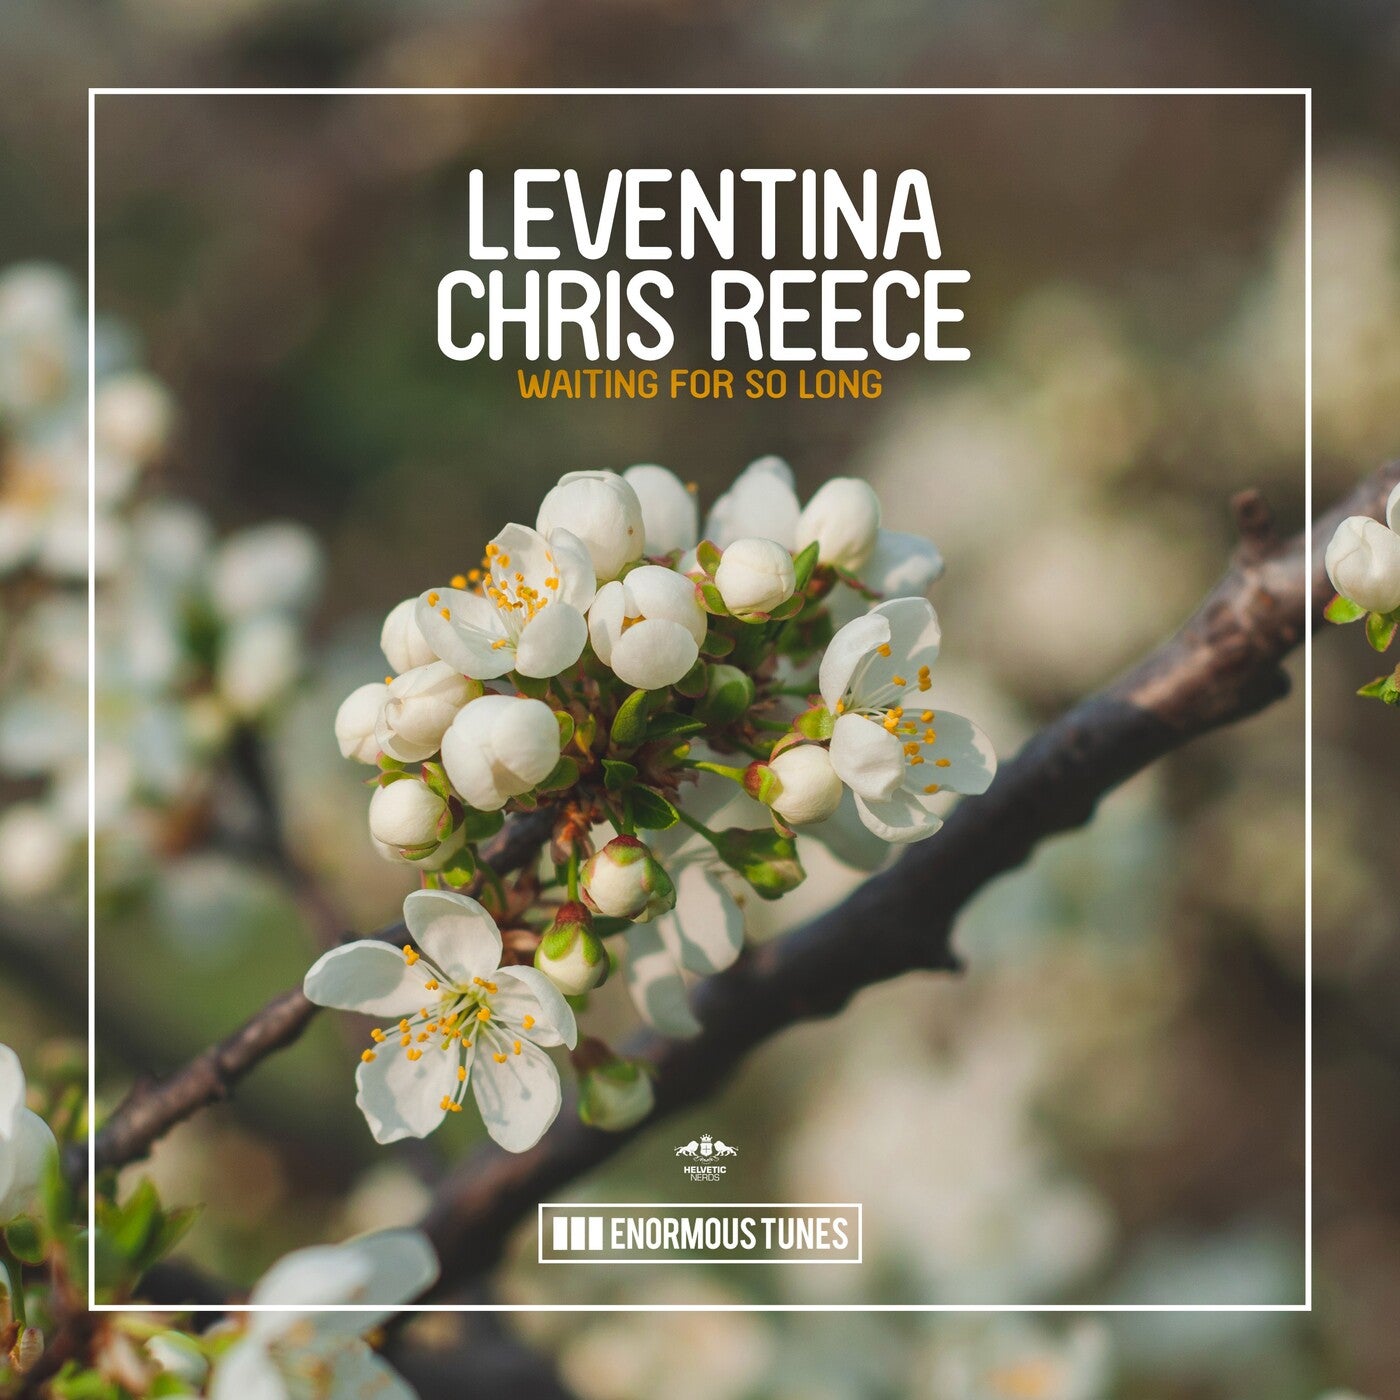 Leventina And Chris Reece - Waiting For So Long (extended Mix) on Revolution Radio